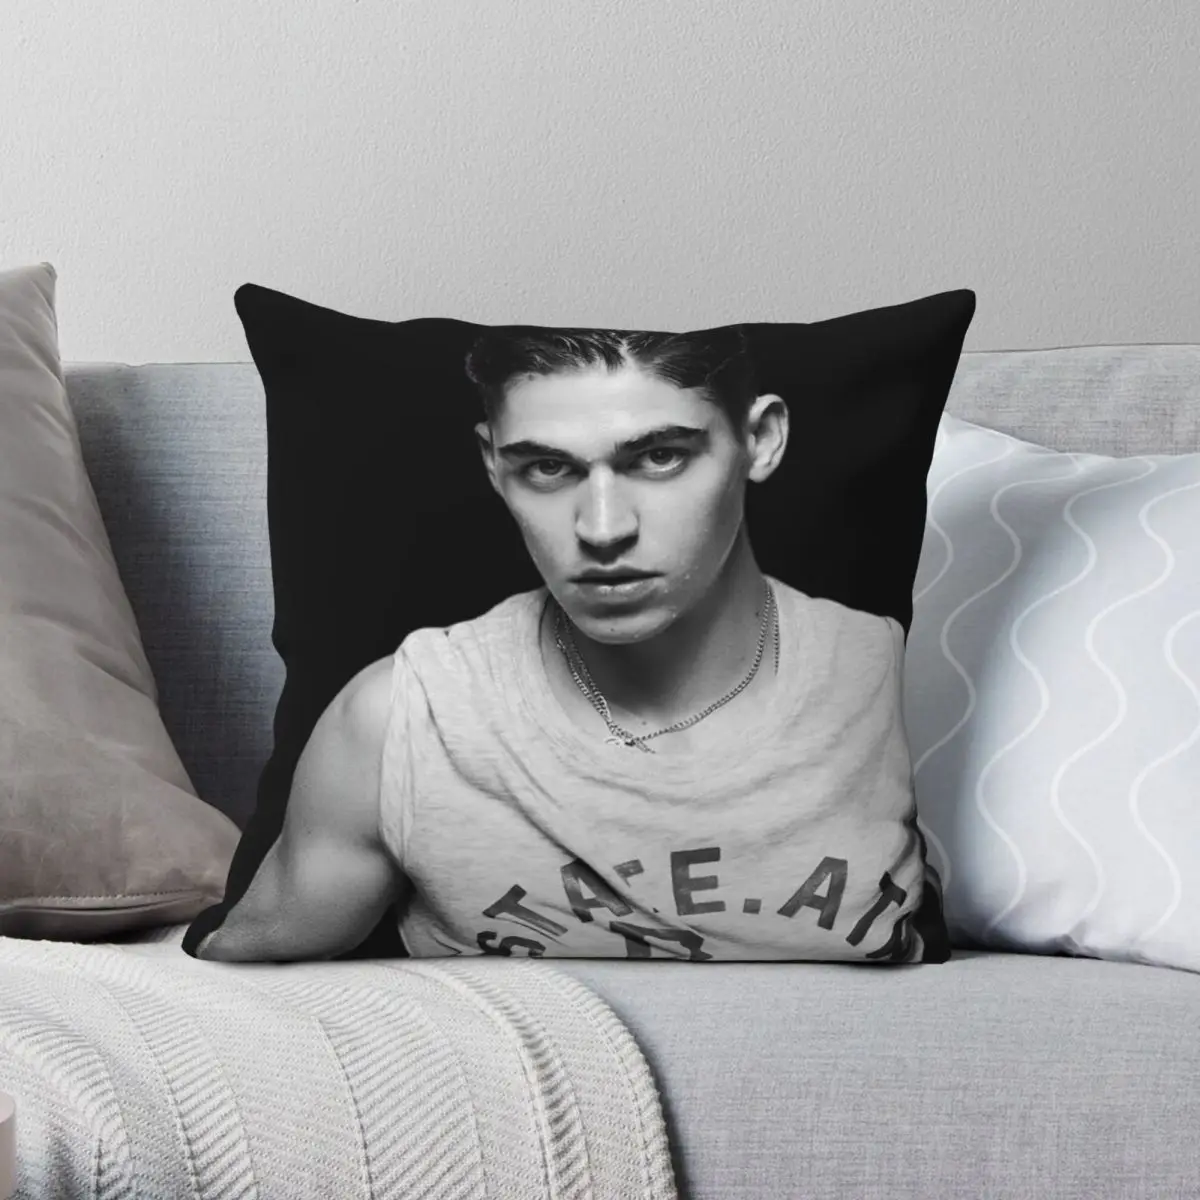 

Hero Fiennes Tiffin Square Pillowcase Polyester Linen Velvet Printed Zip Decorative Sofa Seater Cushion Cover Wholesale 18"